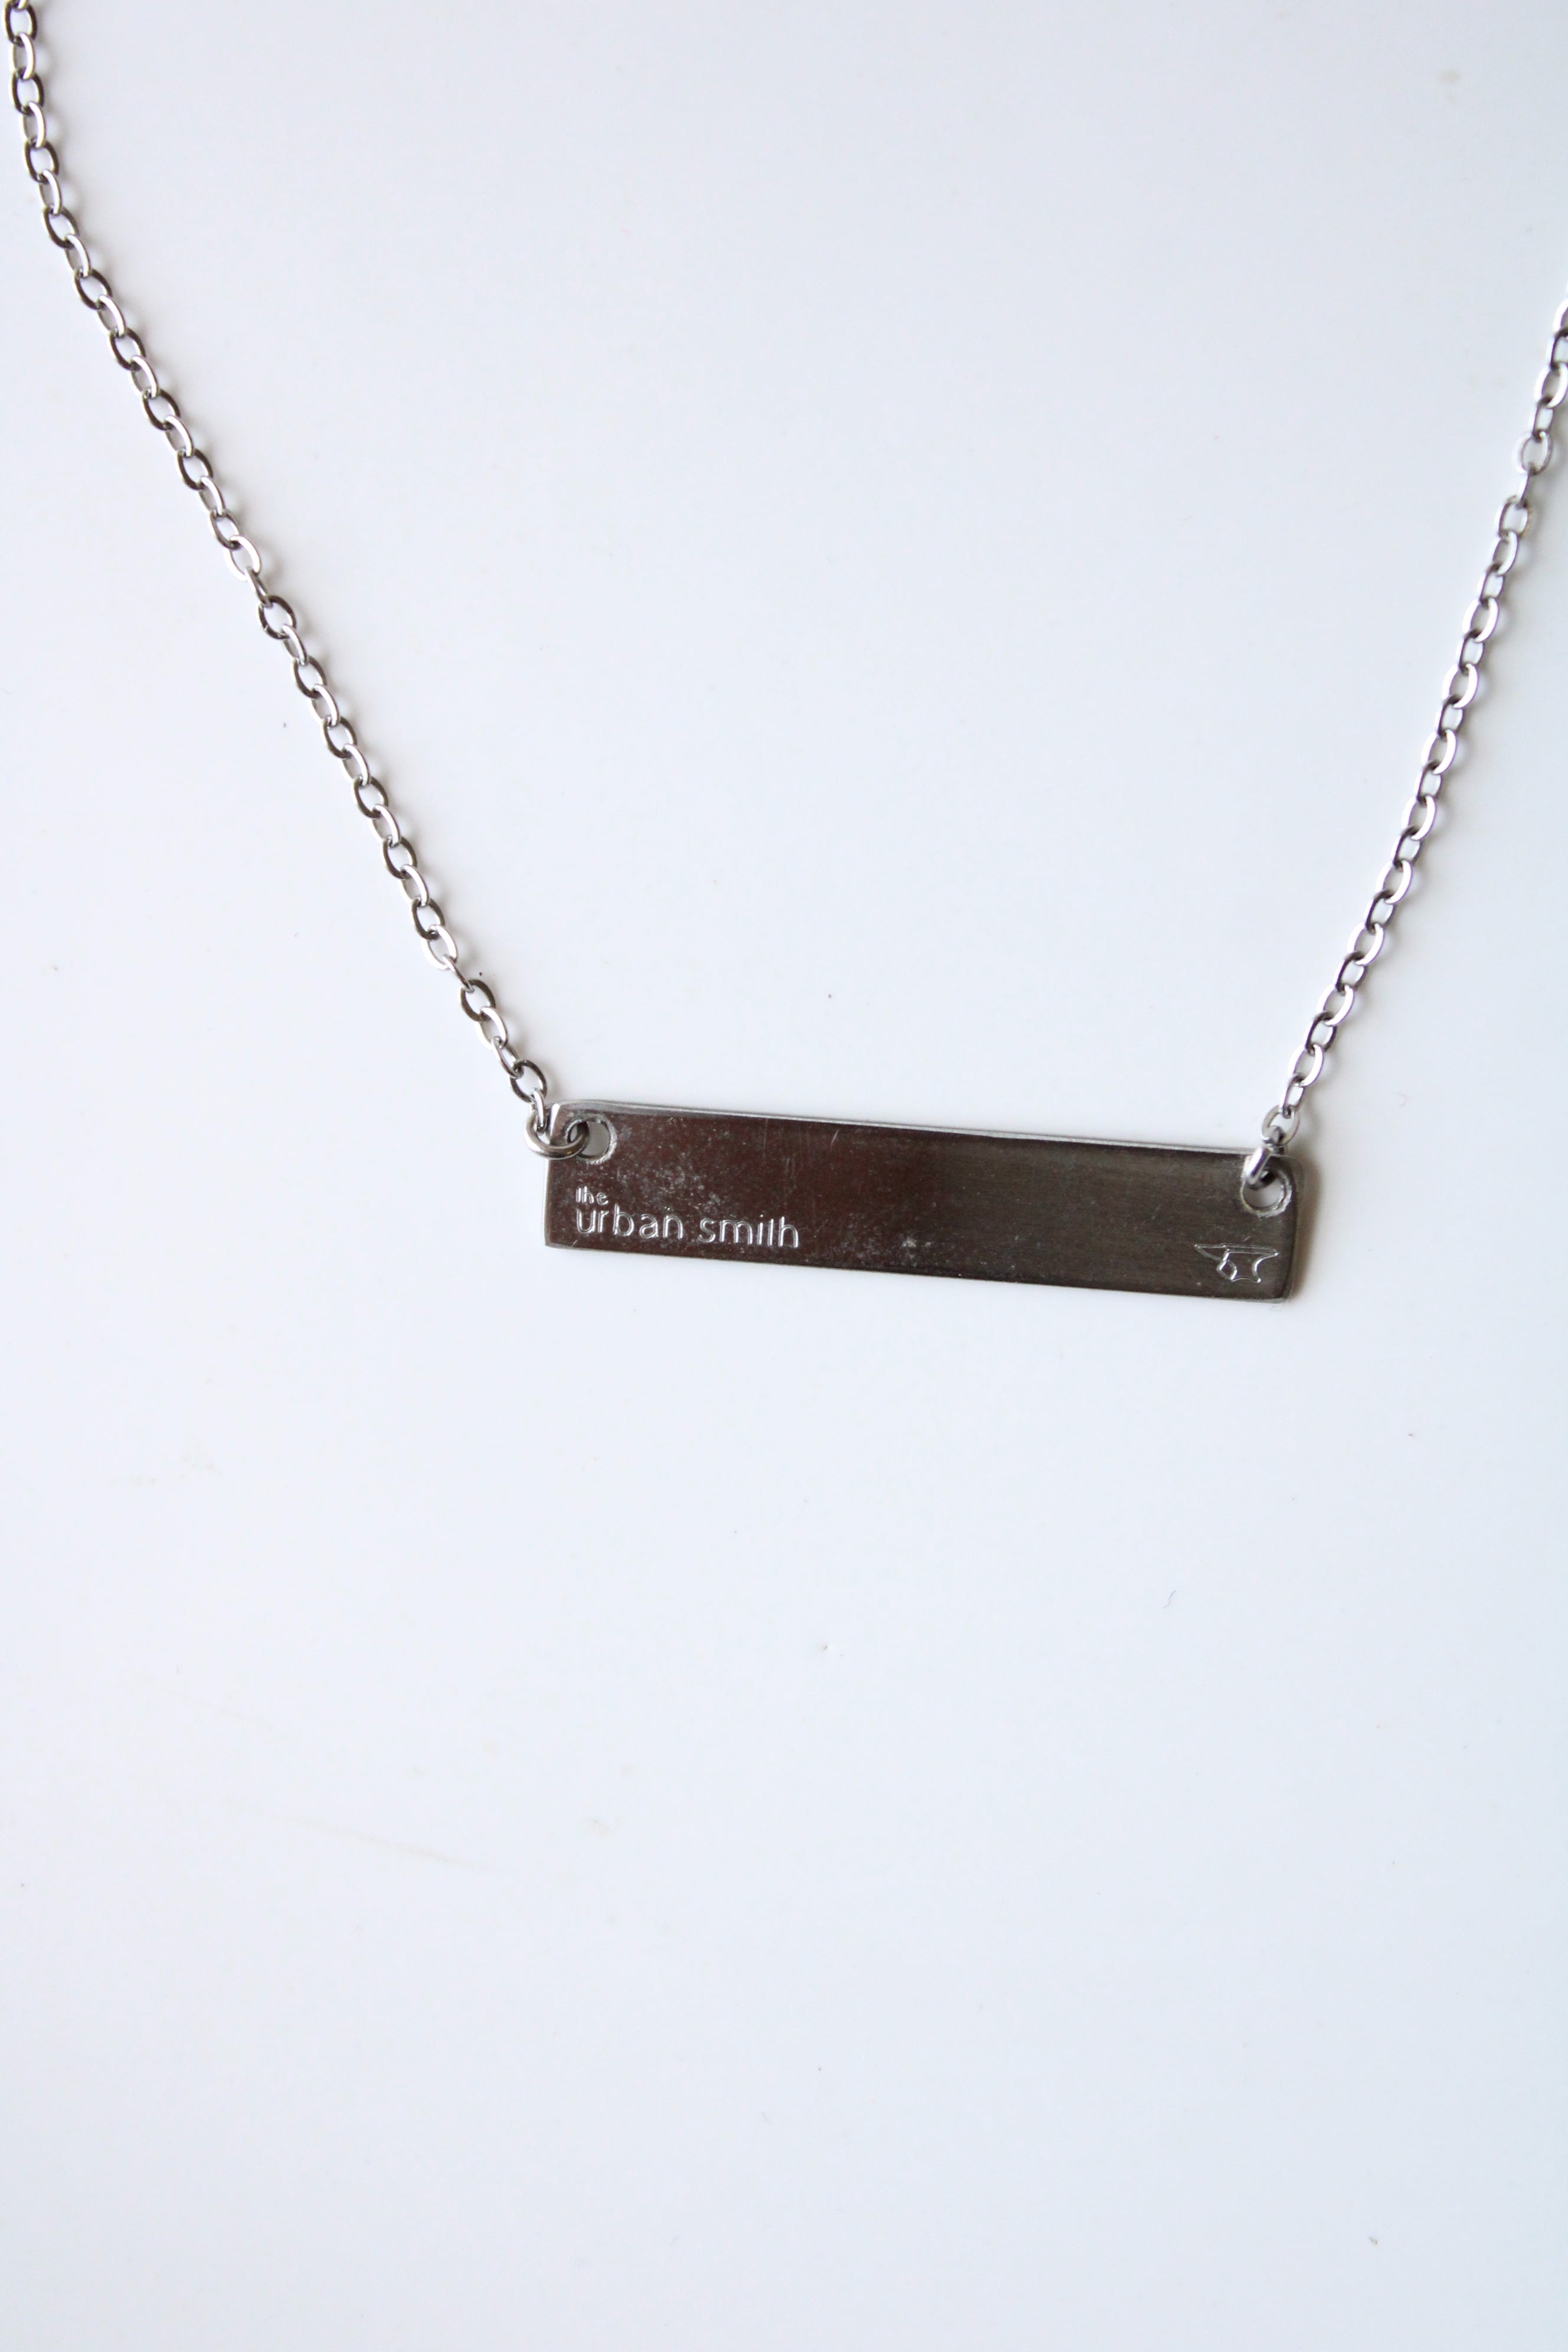 The Urban Smith "No Regrets" Silver Plate Necklace